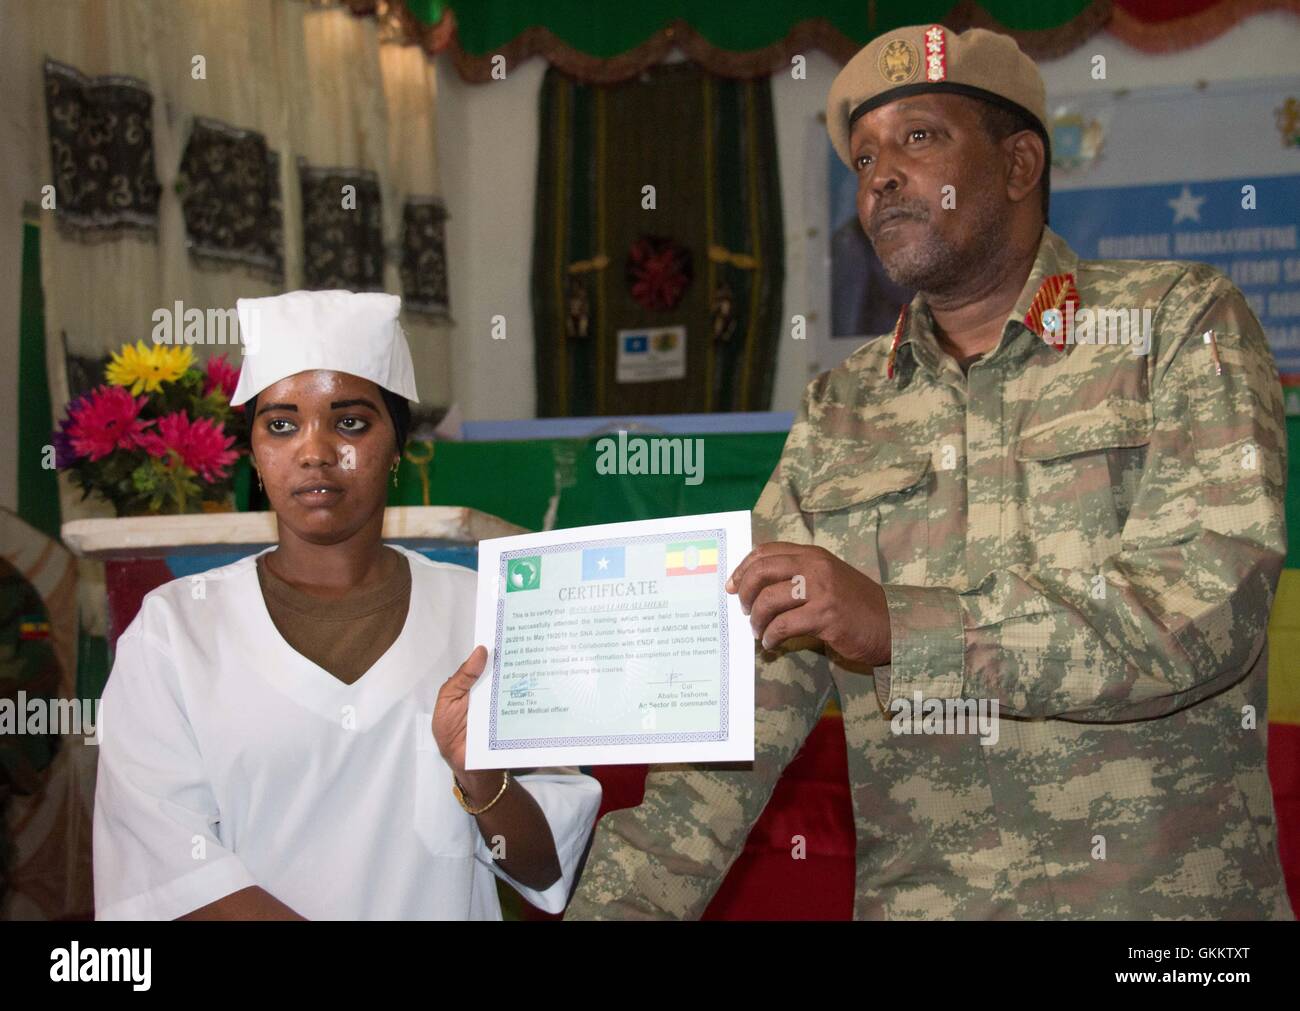 SNA Sector Three Commander, Genaral Ibrahim Adan Yarrow, hands over a certificate  to mark the completion of a training course for nurses in Baidoa, Somalia, on May 24. AMISOM Photo Stock Photo